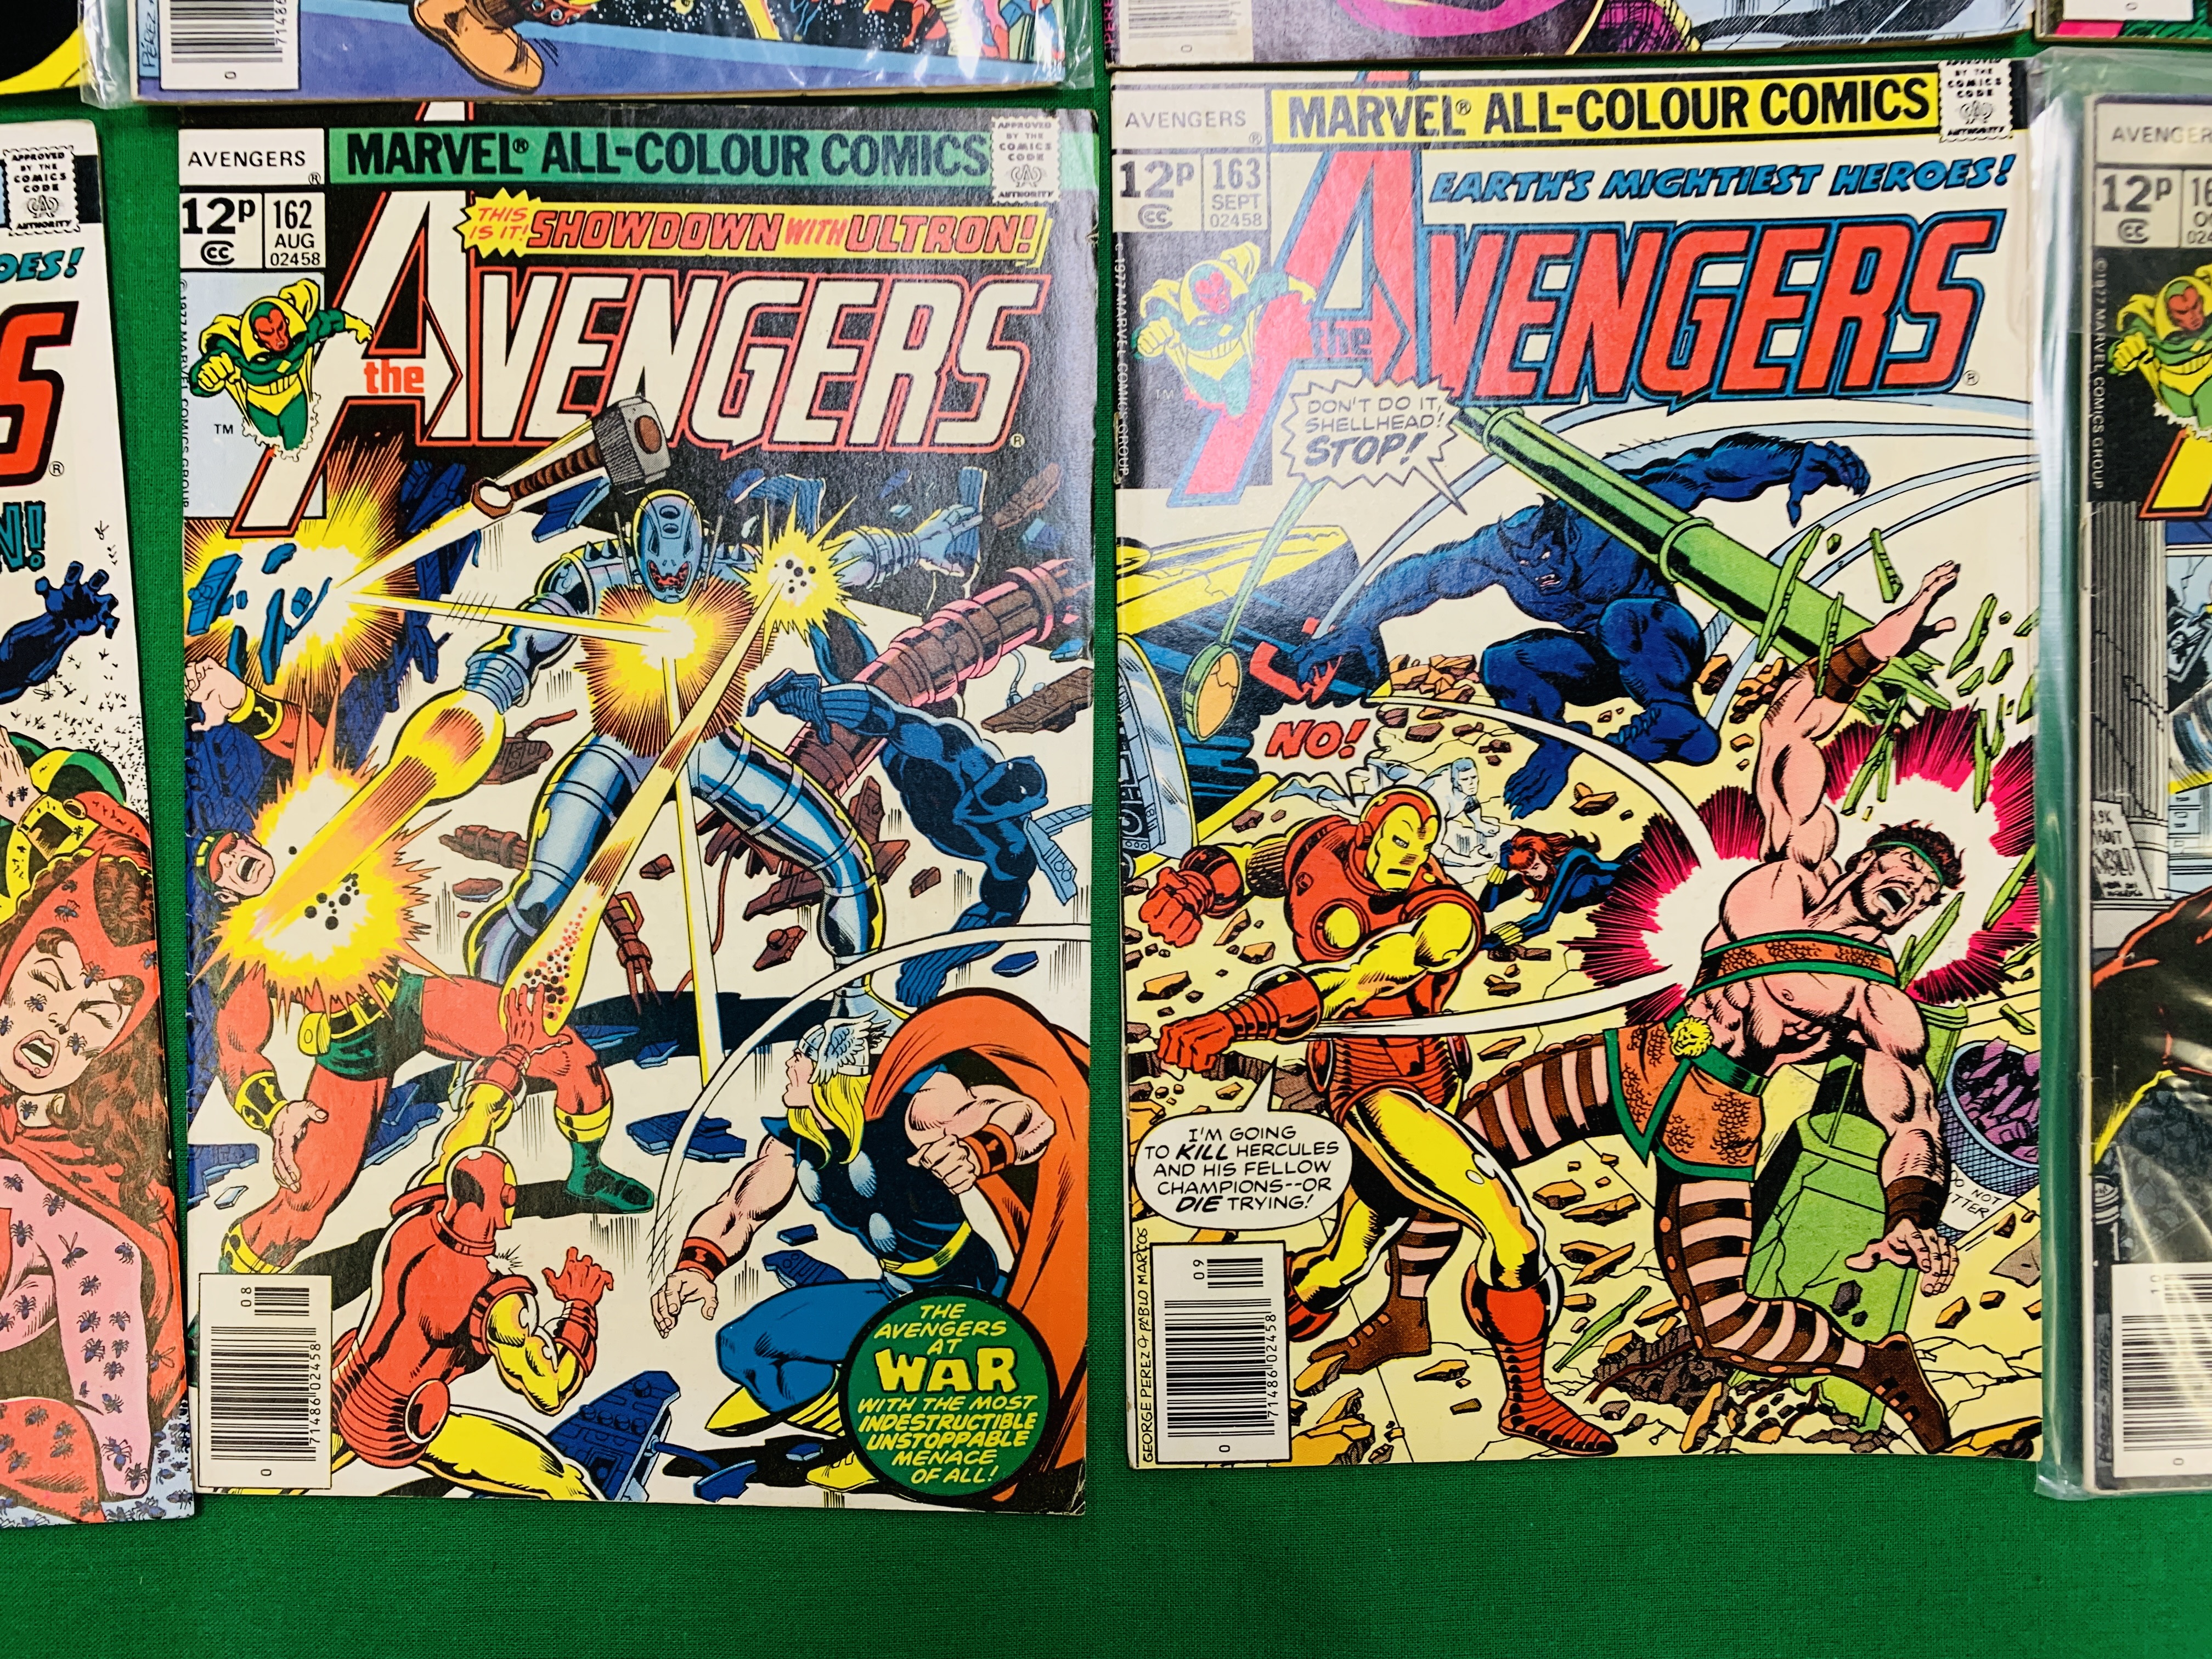 MARVEL COMICS THE AVENGERS NO. 101 - 299, MISSING ISSUES 103 AND 110. - Image 48 of 130